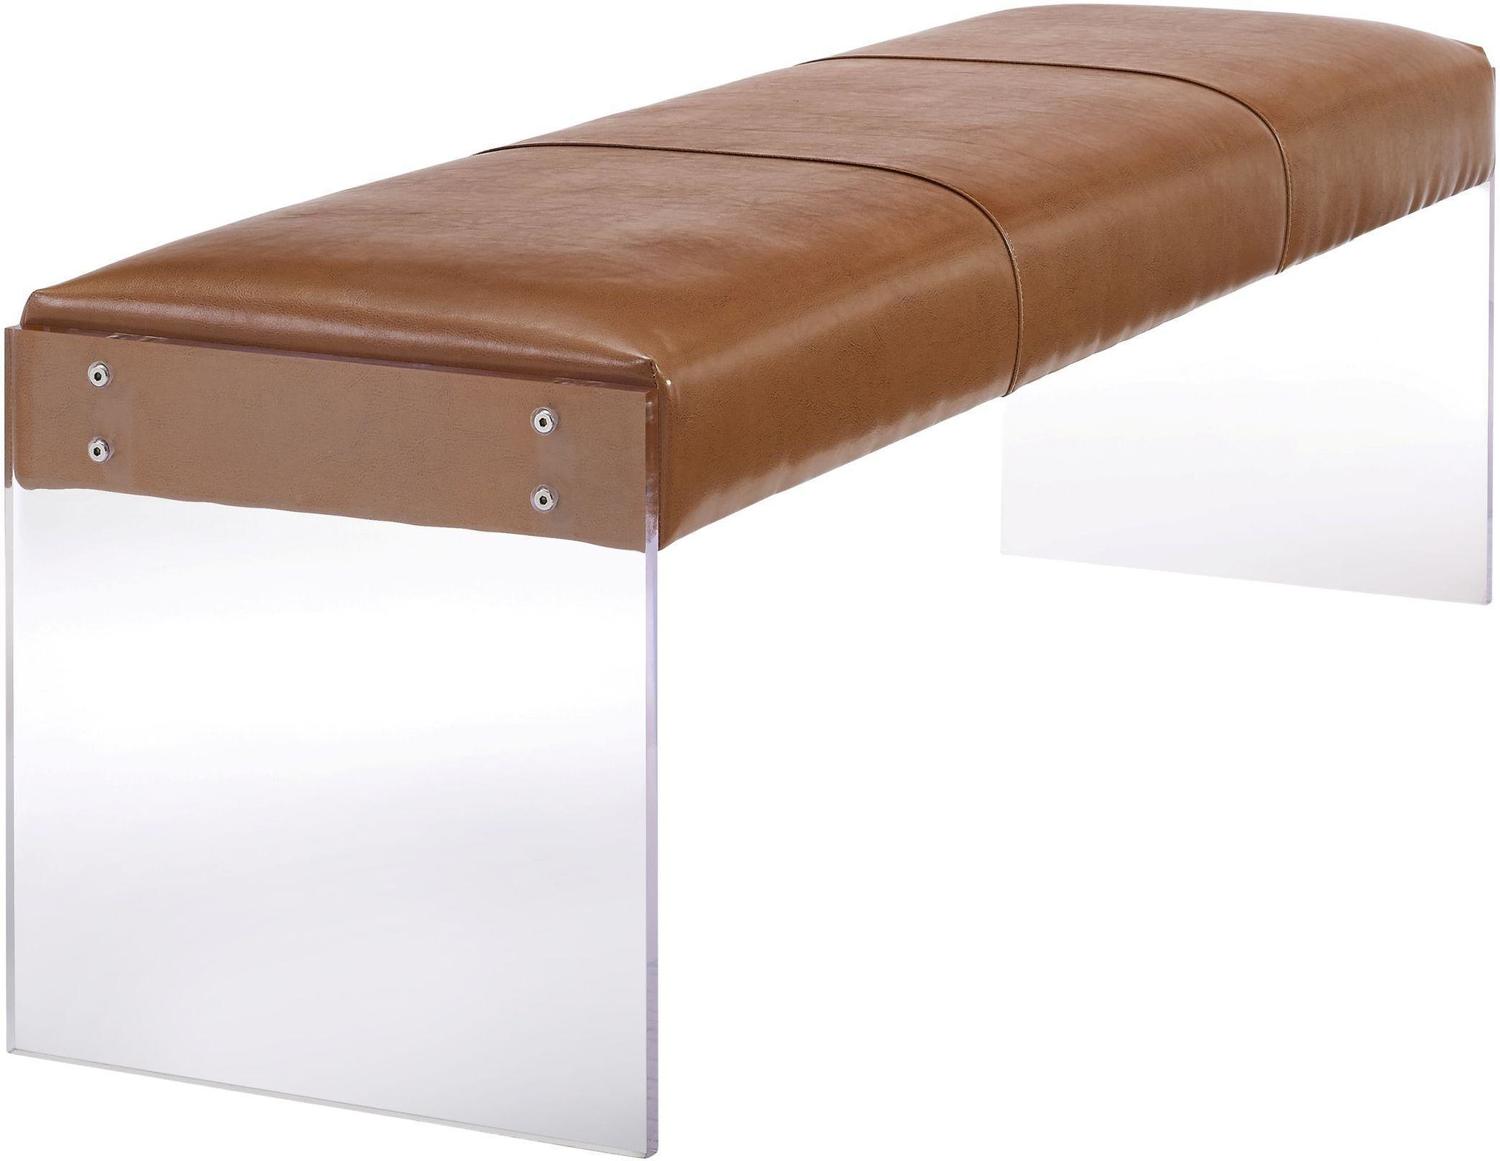 teal velvet bench Contemporary Design Furniture Benches Ottomans and Benches Brown